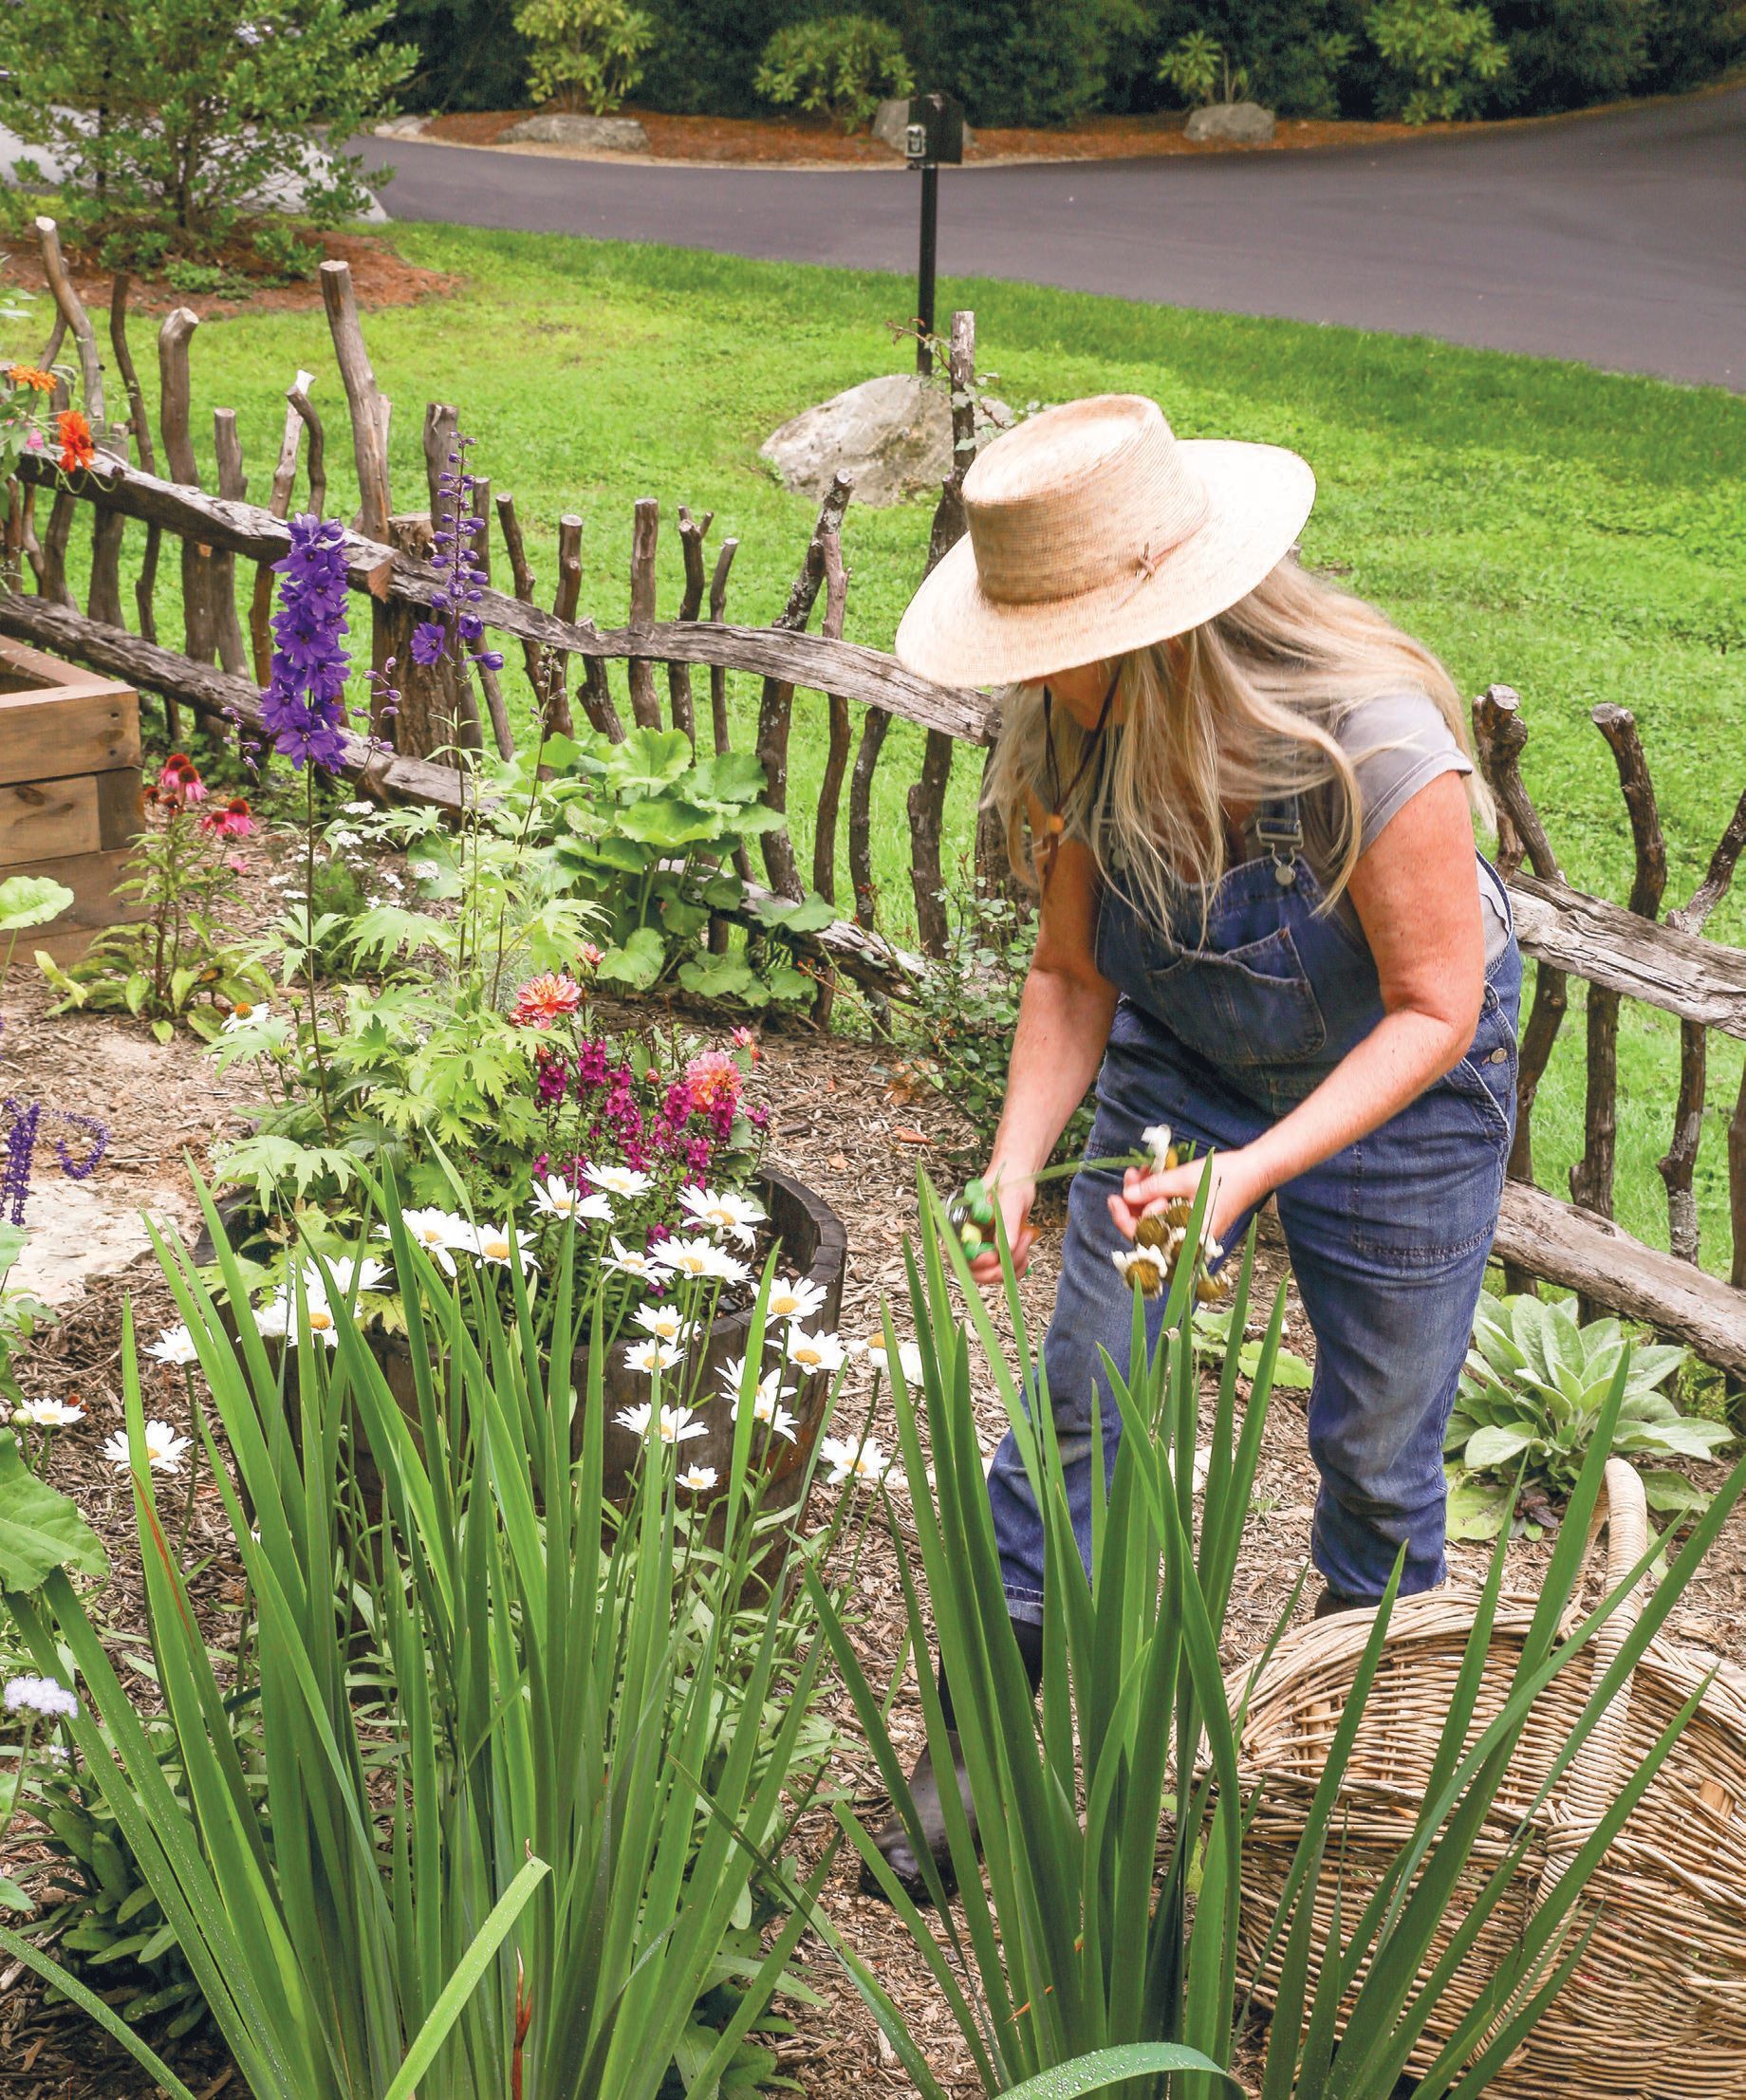 Half-Mile Farm’s Debbie Delany tends to the garden. PHOTO COURTESY OF OLD EDWARDS INN AND SPA